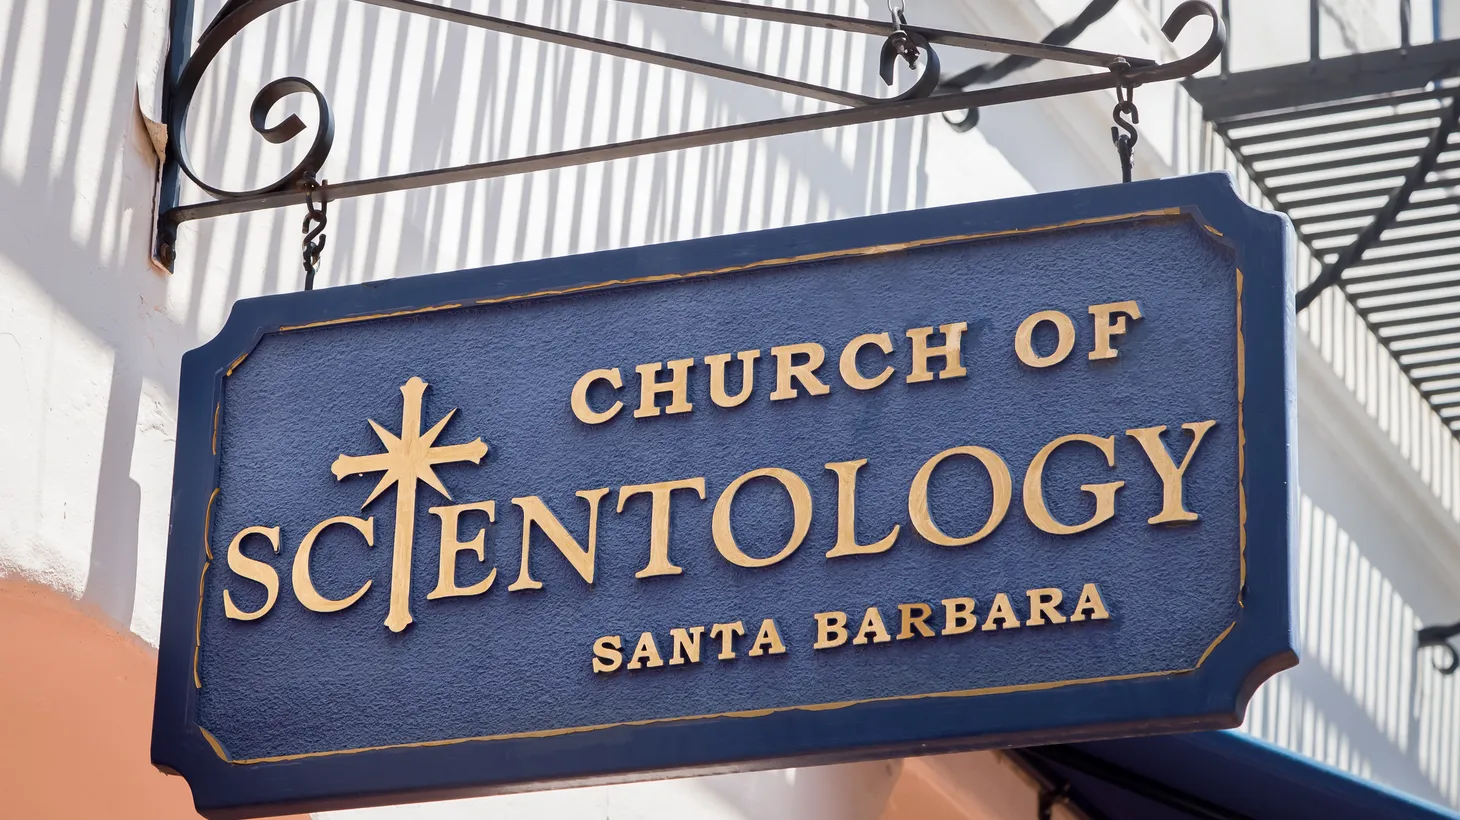 The Church of Scientology has been at the center of two high-profile rape trials.